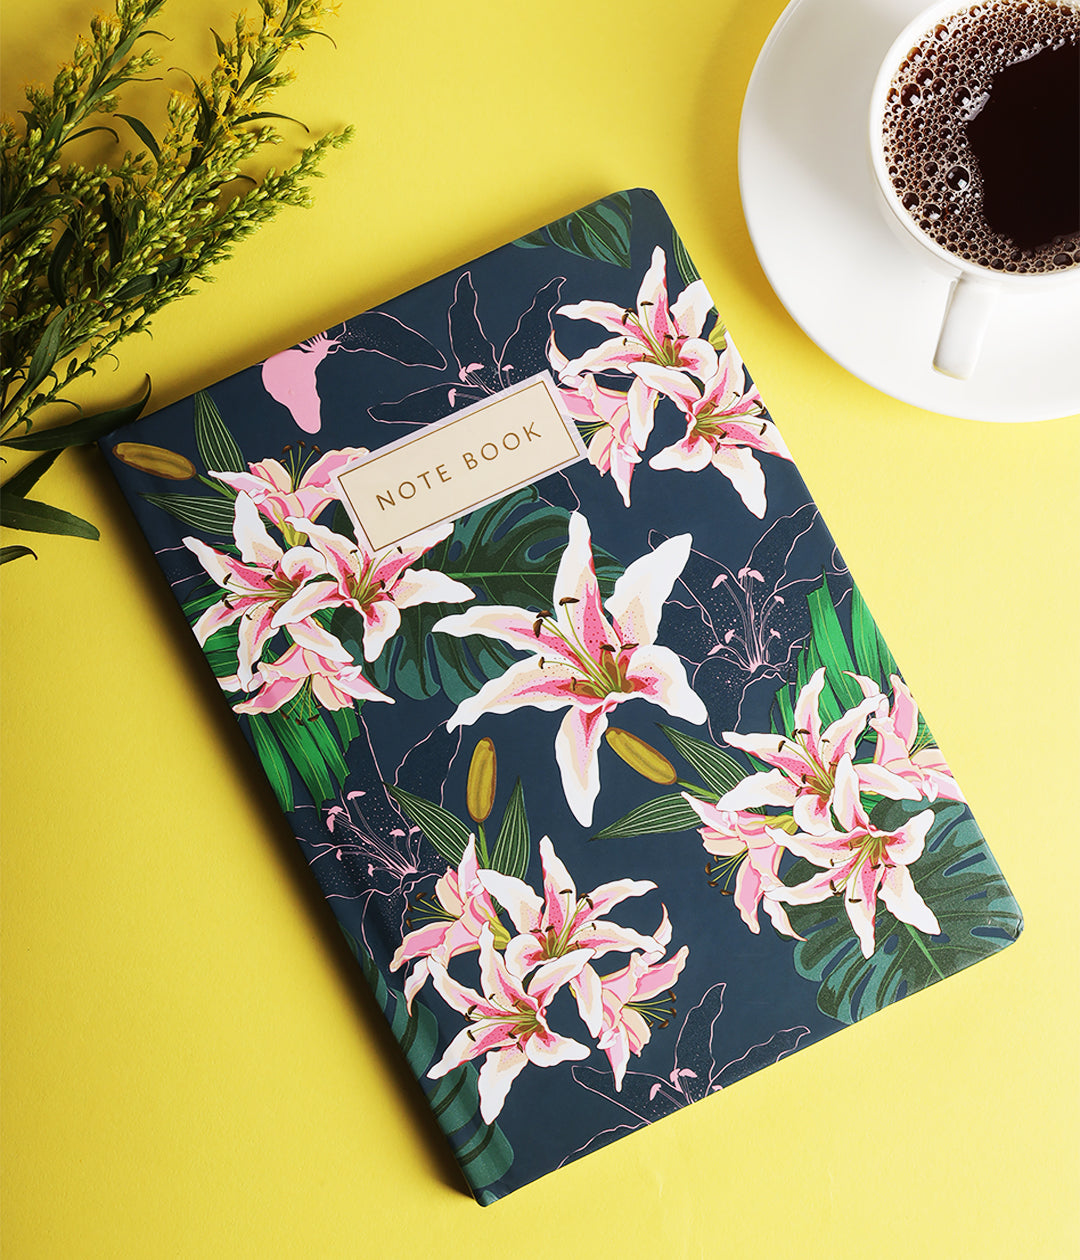 Paint Me Bloom Hardbound Notebook Journal Diary with Matt Lamination Accents